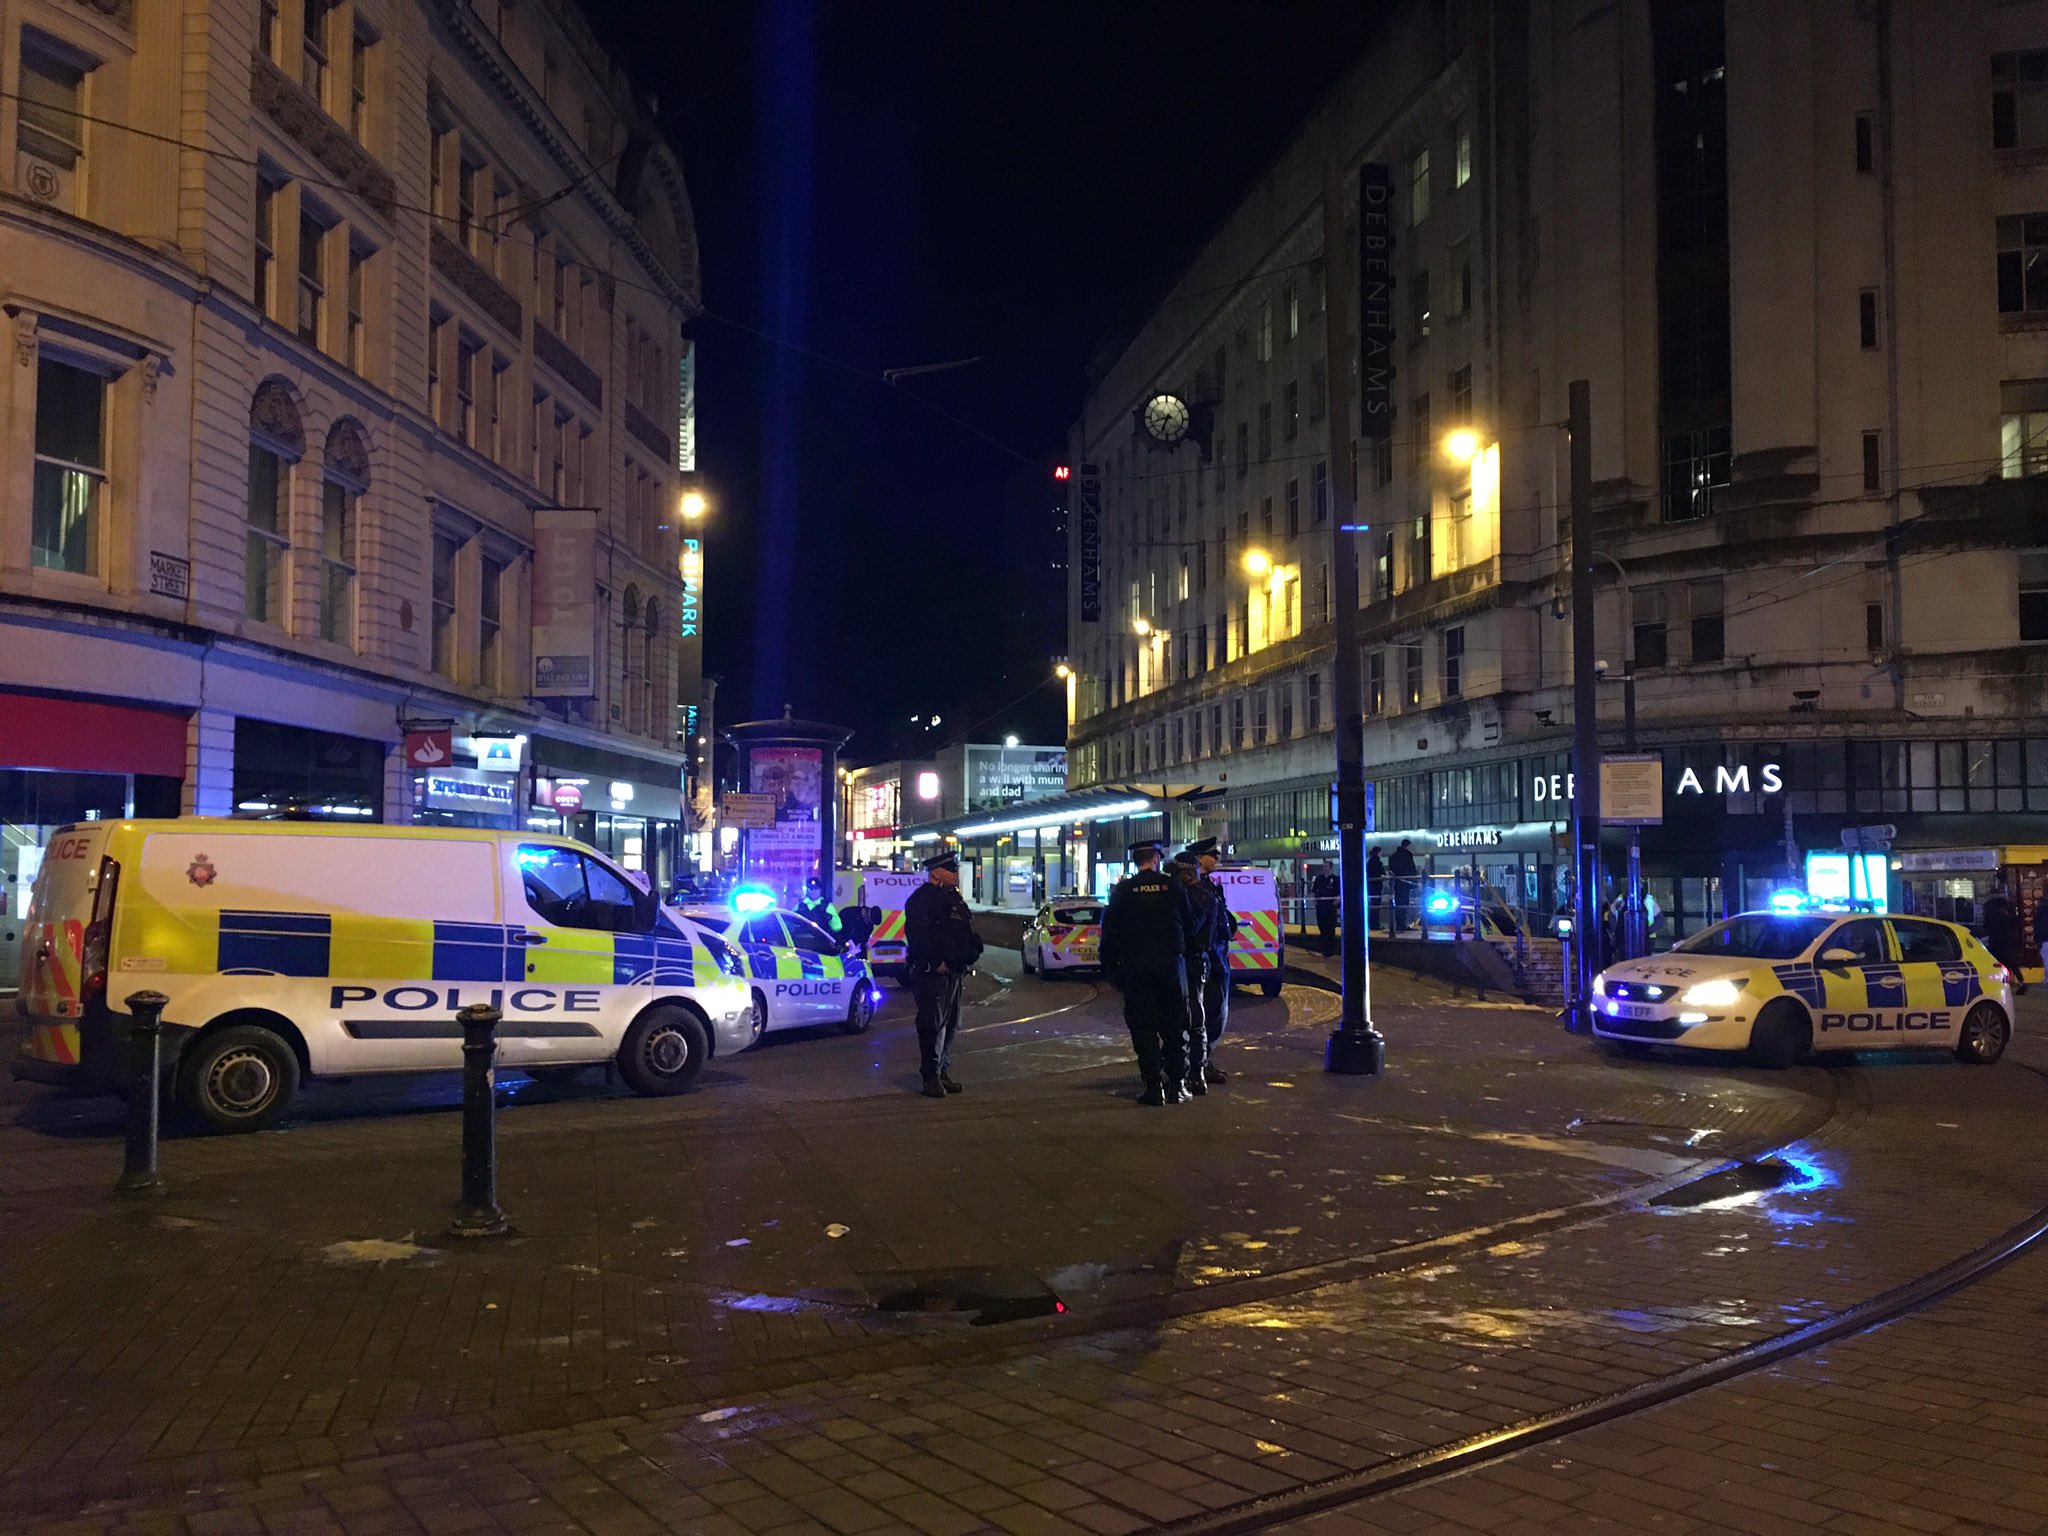 Two people have been injured after a stabbing attack outside a busy department store in the UK overnight.